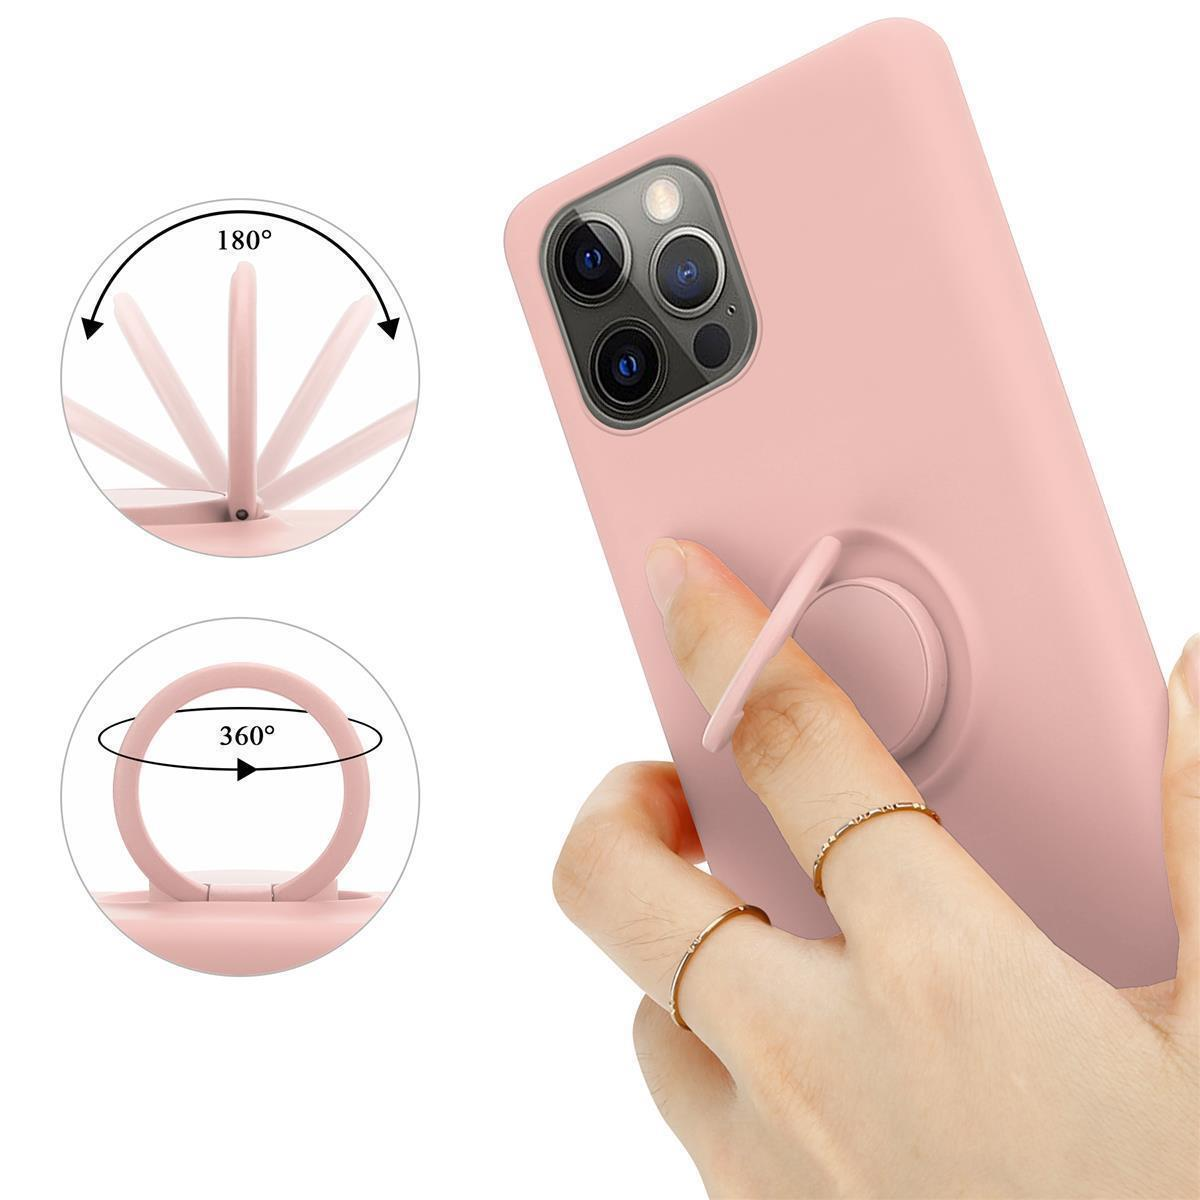 Style, Ring Silicone Liquid Apple, 13 iPhone im LIQUID Backcover, MAX, PINK Hülle PRO CADORABO Case